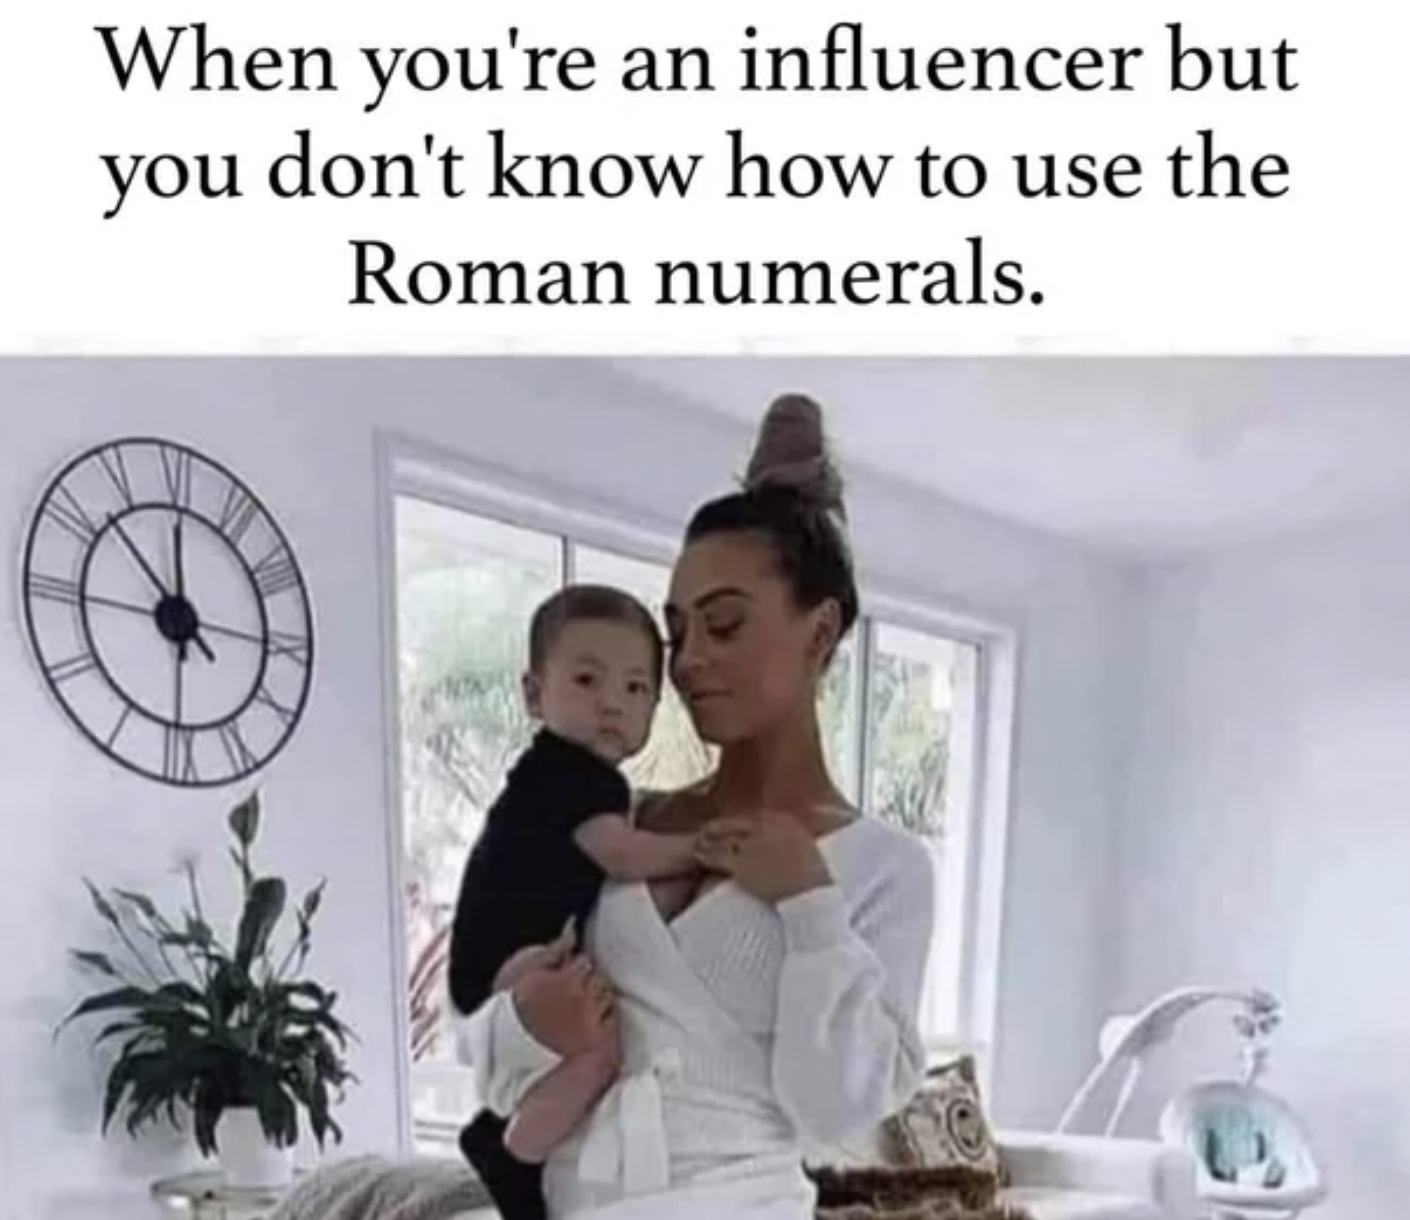 Trashy Pics - roman numerals meme - When you're an influencer but you don't know how to use the Roman numerals.